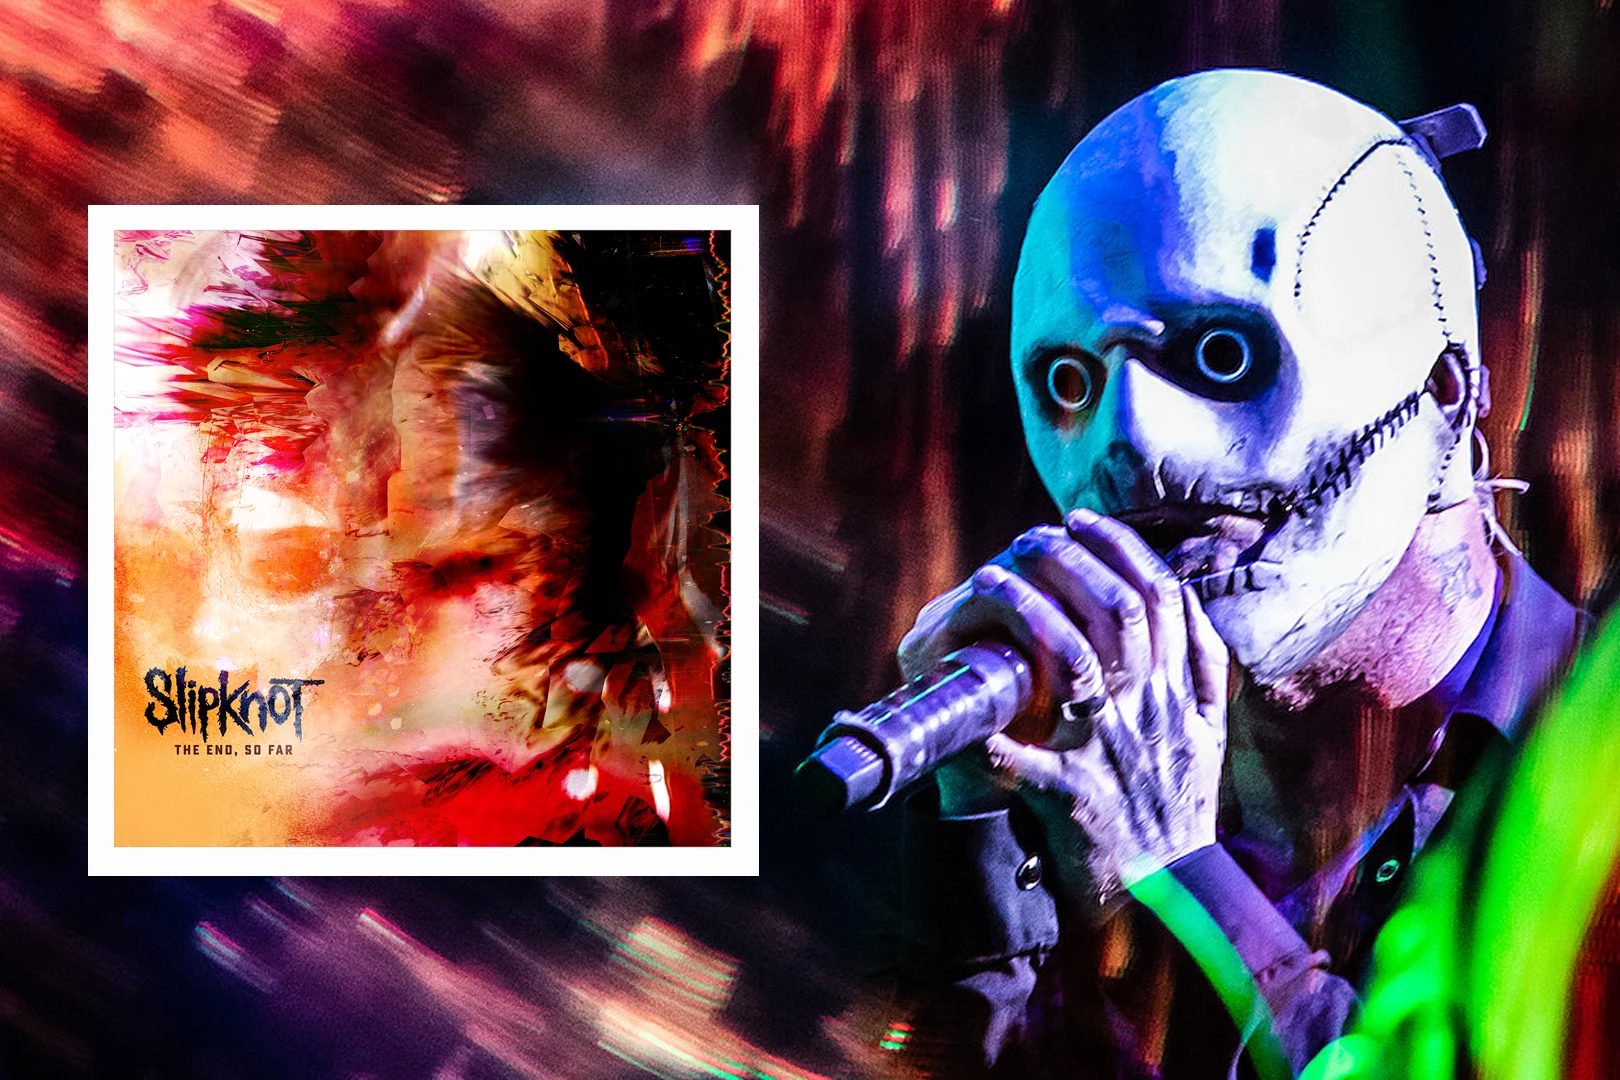 9 Things We Love About Slipknot's New Album 'The End, So Far'